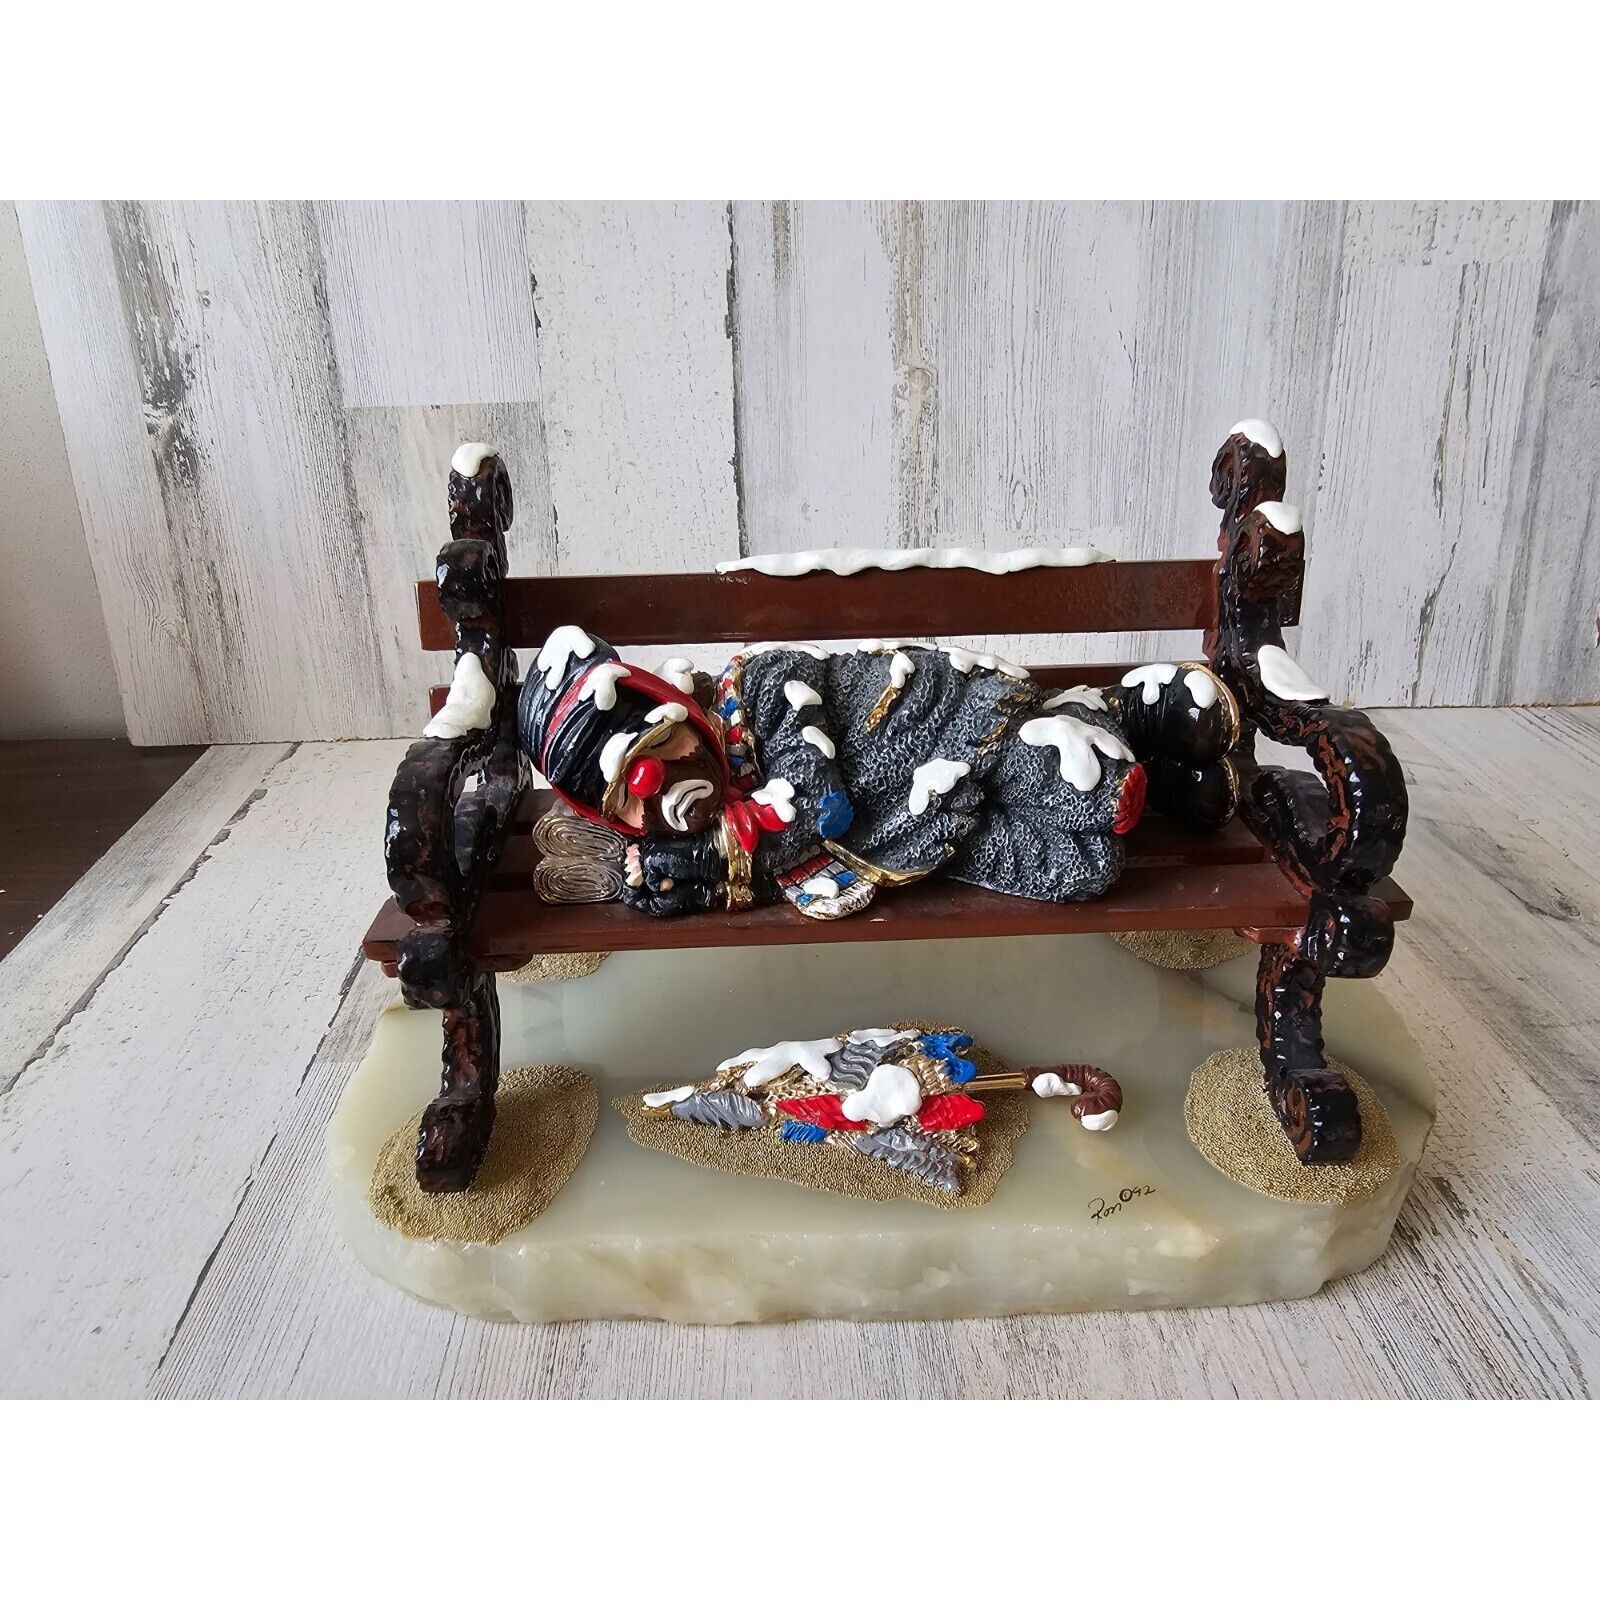 Ron Lee Snow drifter clown large 1992 bench limited huge is 644 of 1,250